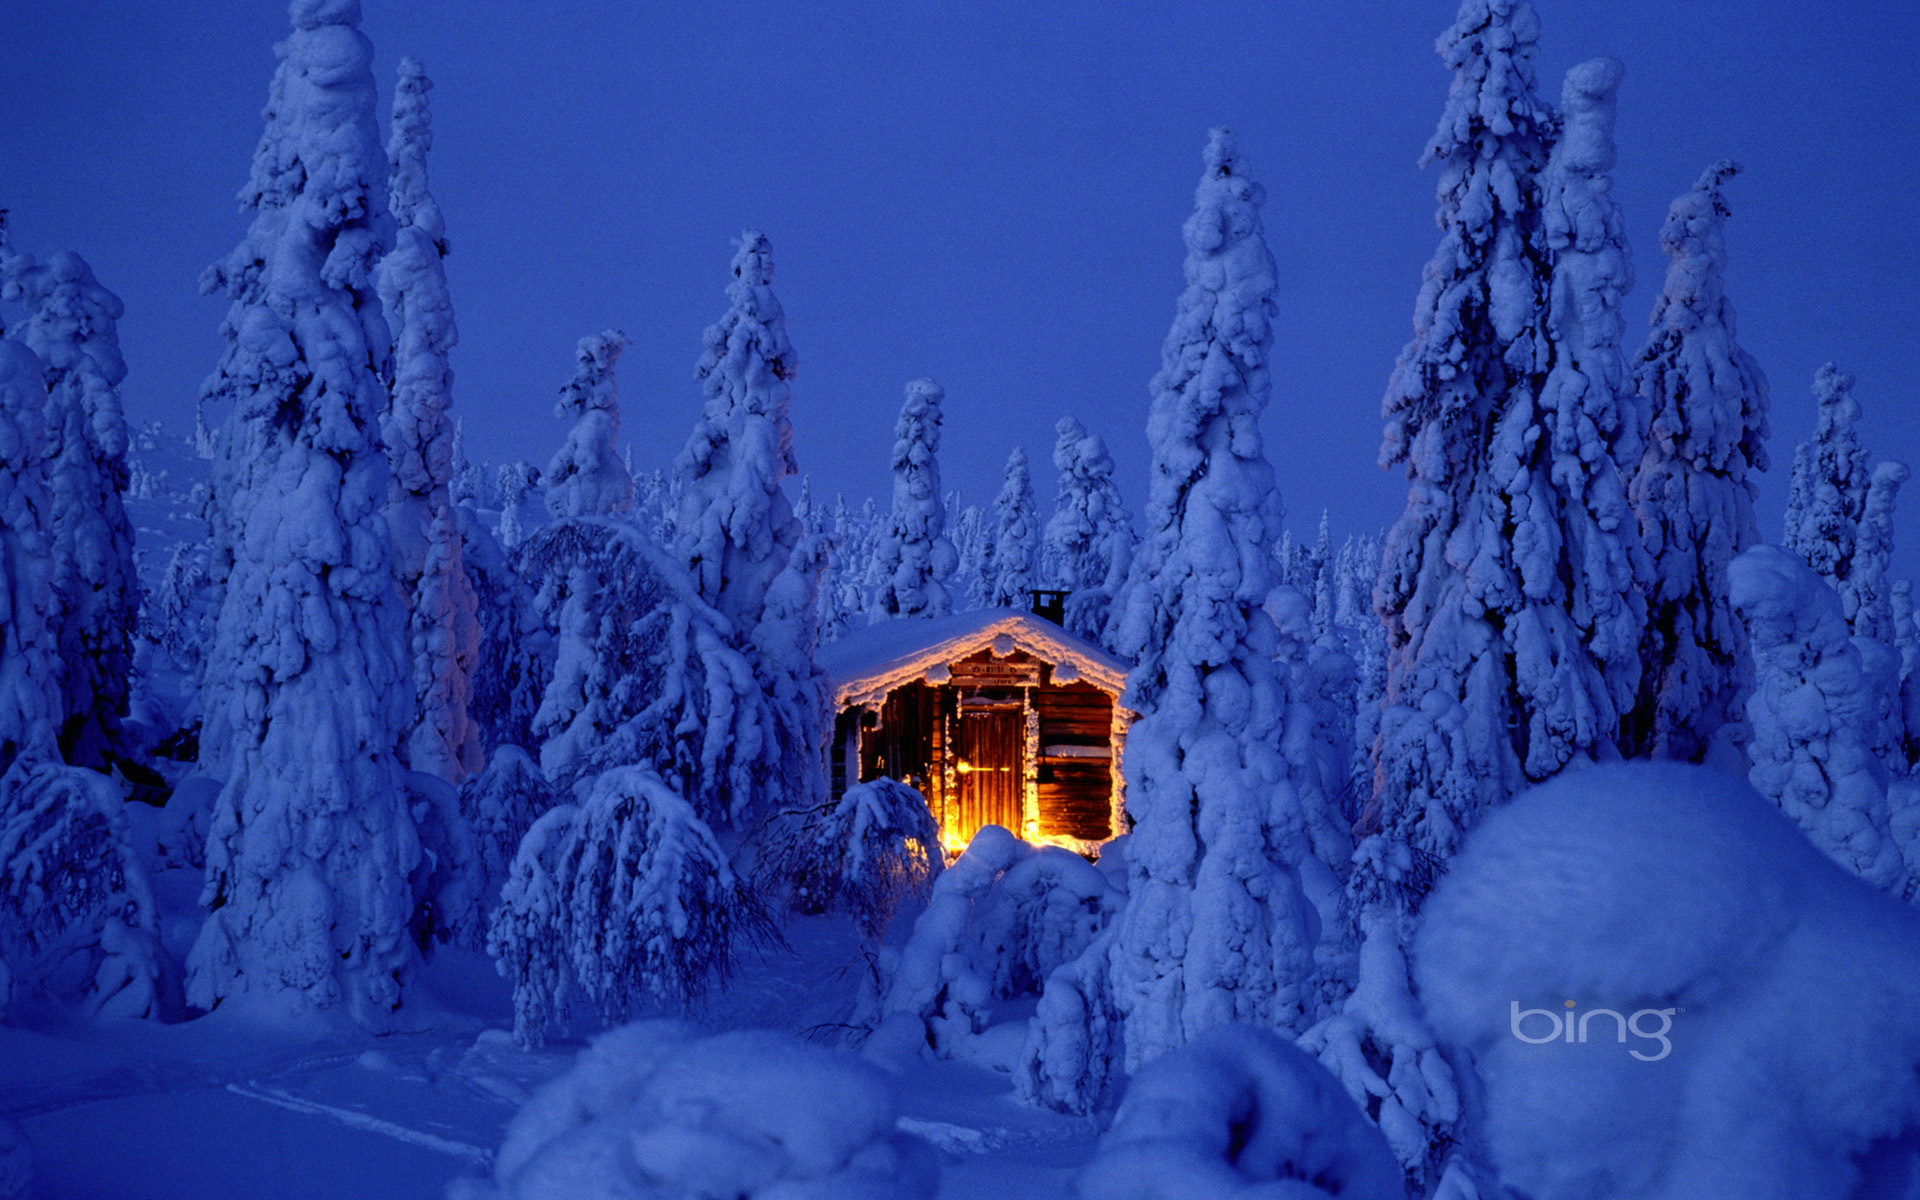 Snowy spruce forest with log cabin in Riisitunturi National Park, Finland